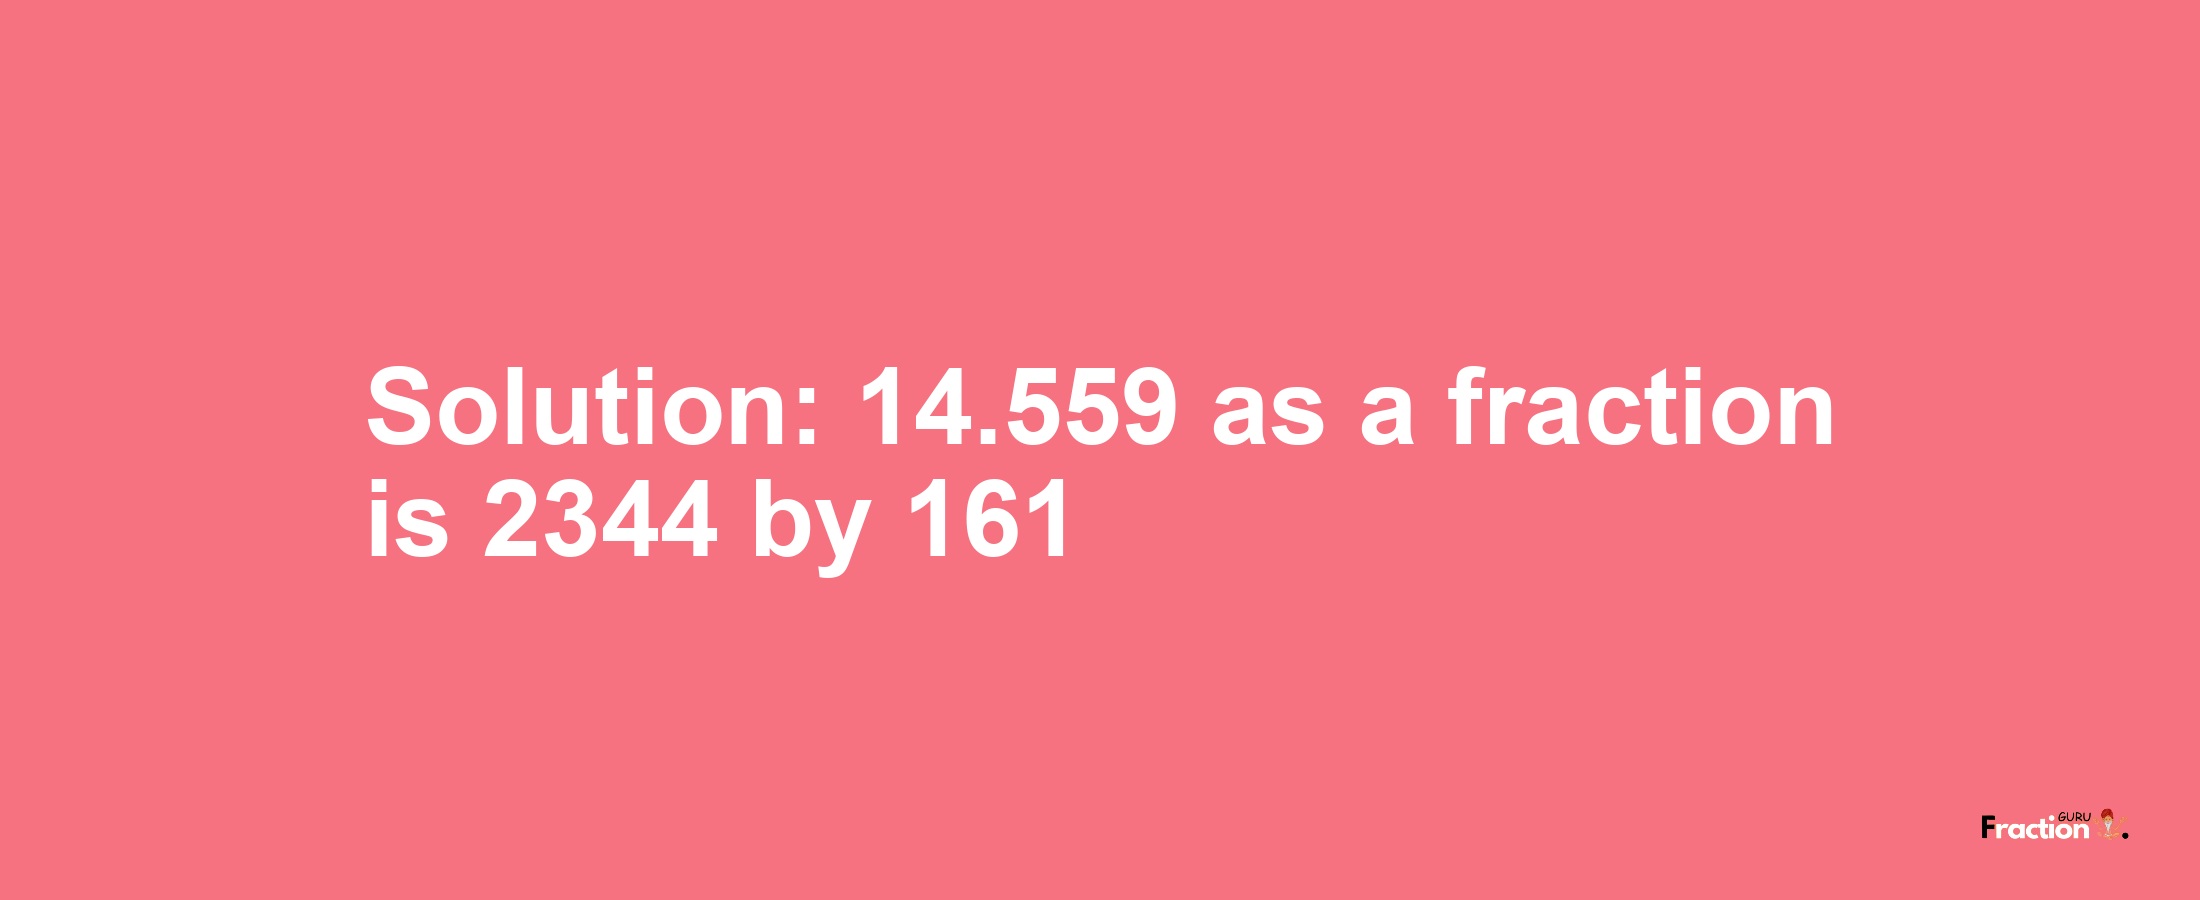 Solution:14.559 as a fraction is 2344/161